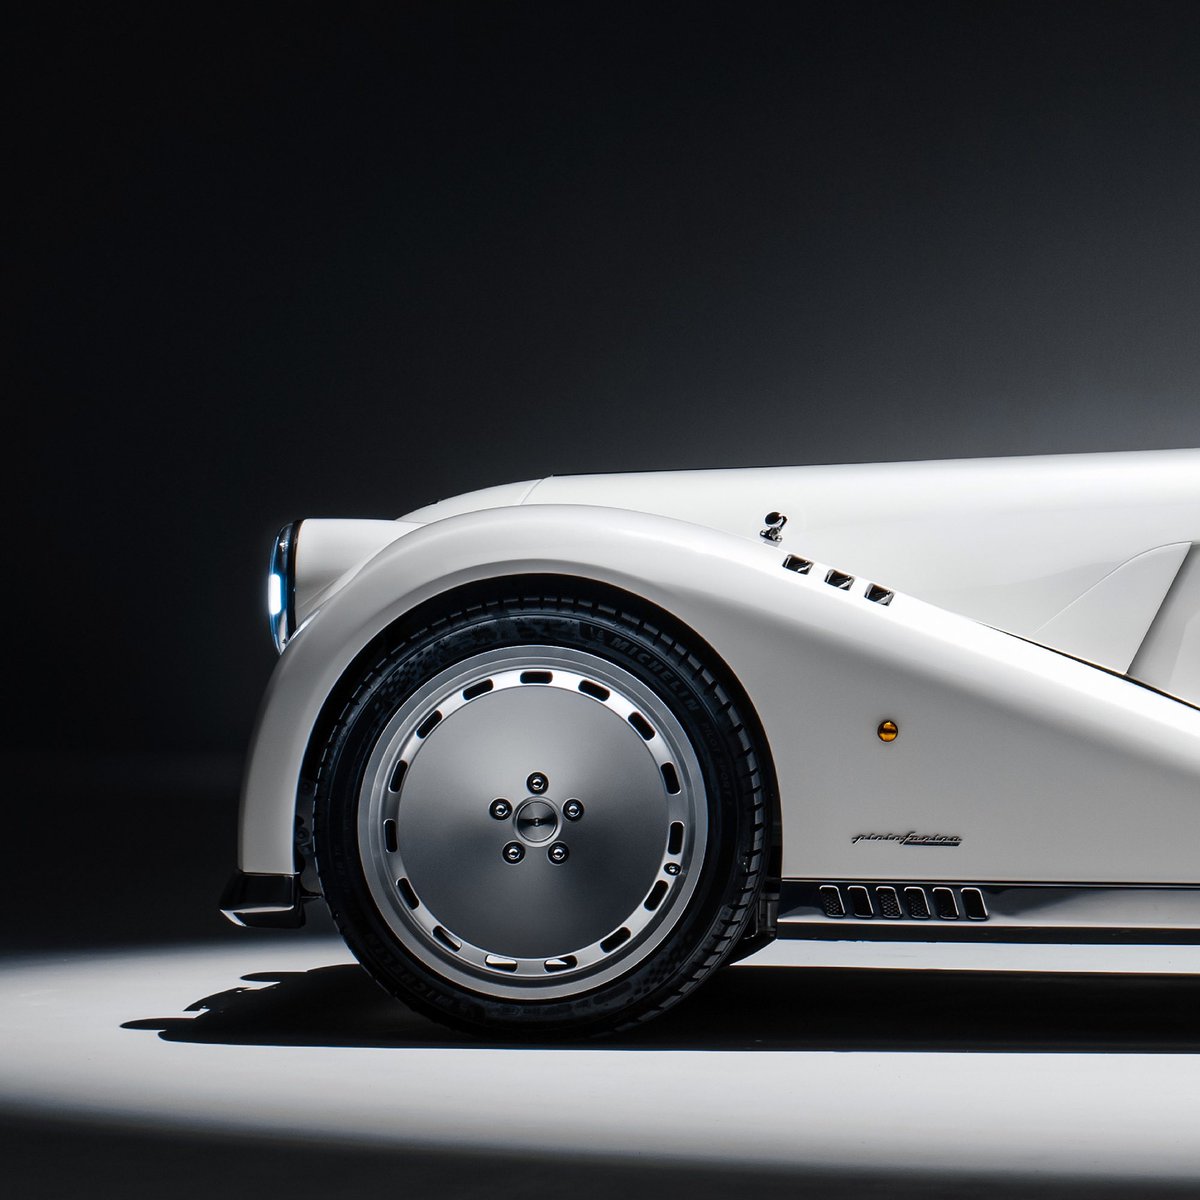 Midsummer: the first production car to feature the Pininfarina Fuoriserie Badge. The new Morgan special project is adorned with the prestigious emblem, elegantly positioned on the side of the vehicle just behind the front wheels, as a clear testament to Midsummer’s unique status.